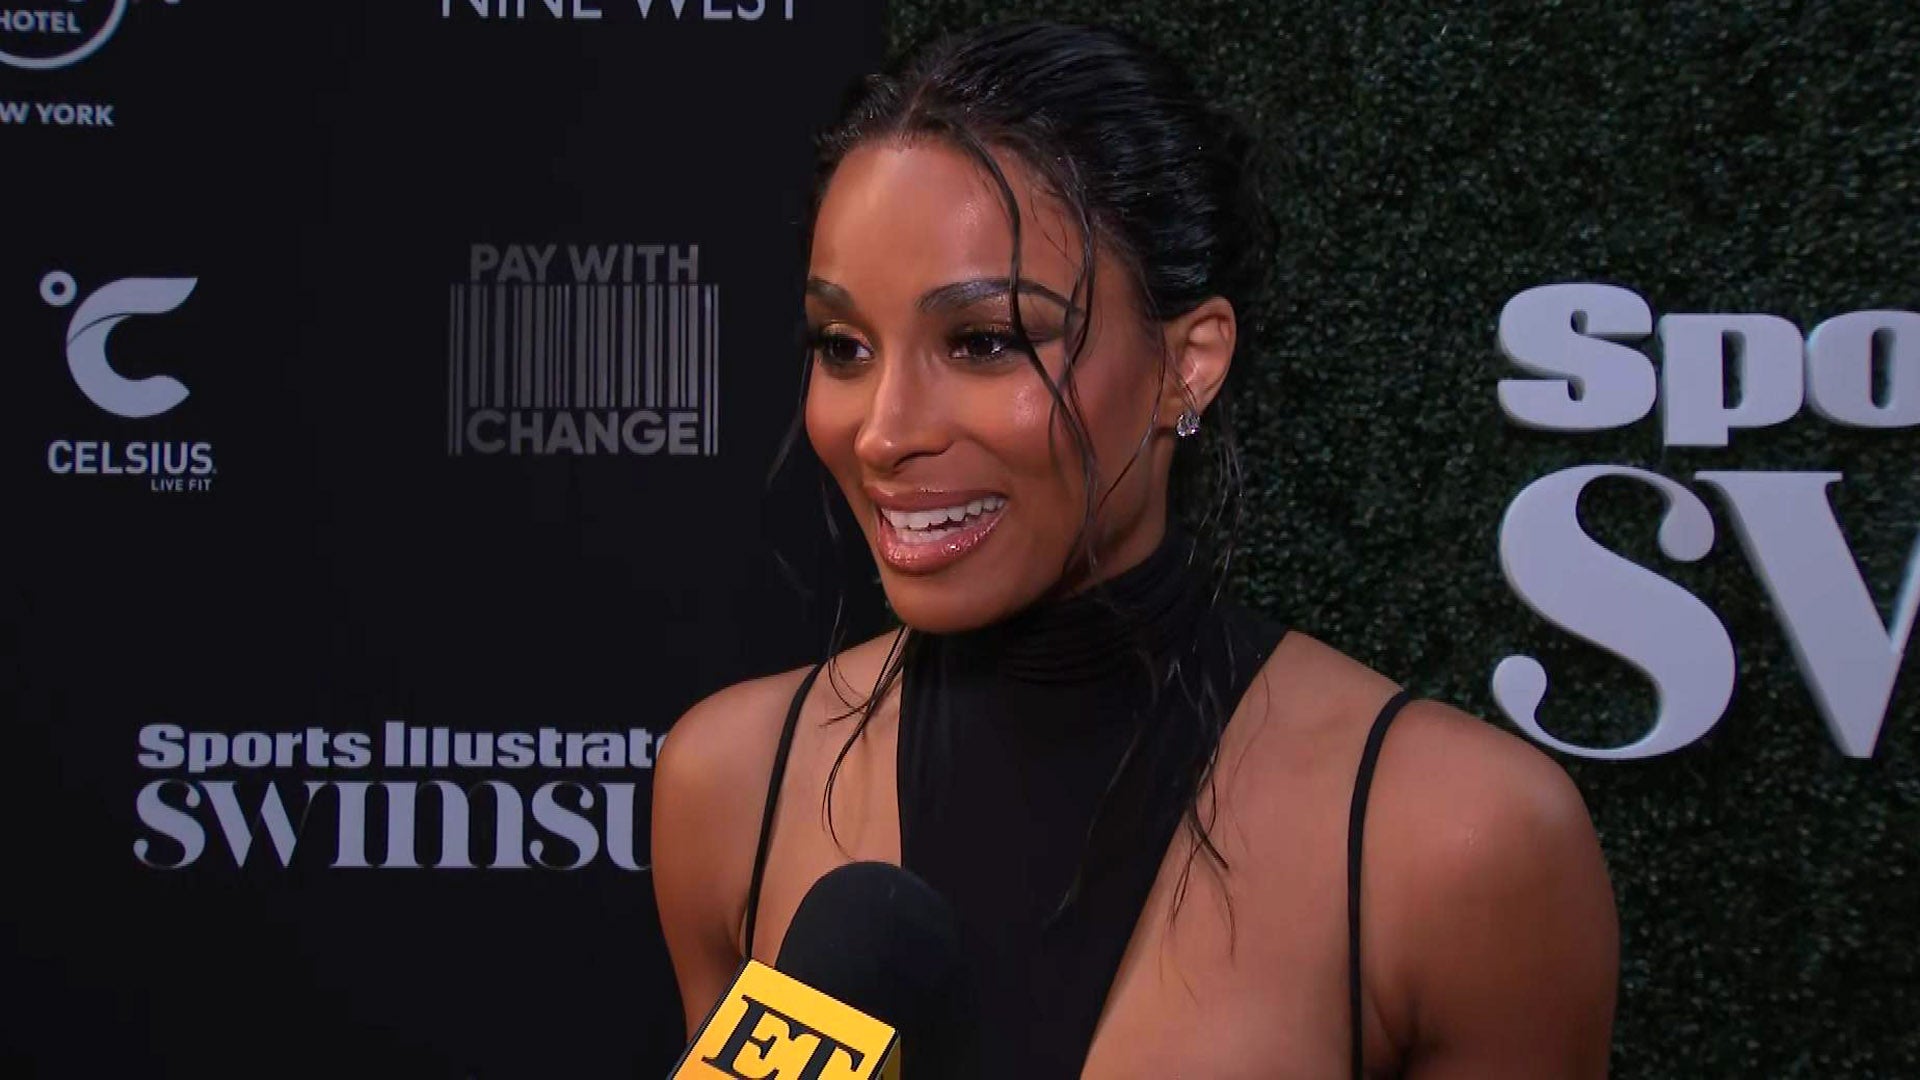 Ciara Teases New Song and Album Later This Year